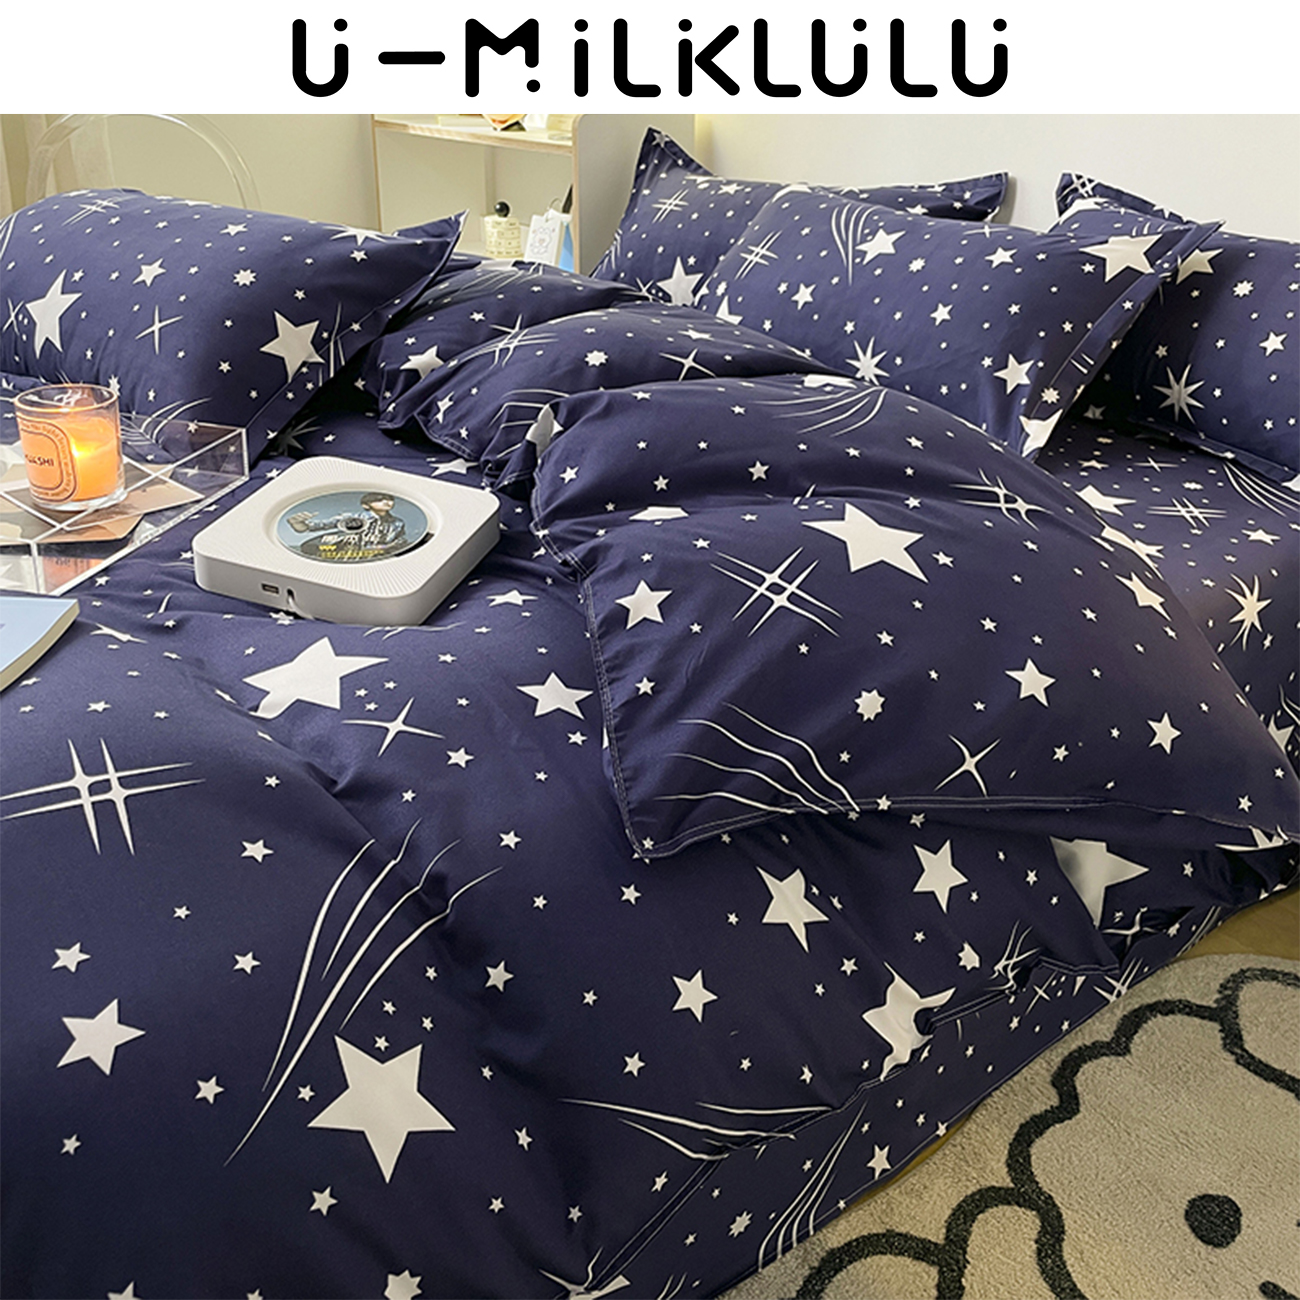 An Array of Star Retro Comforter Queen King Bedding Set Bed Sheets and Pillowcases Luxury Simple Dark Blue Duvet Cover Set 180